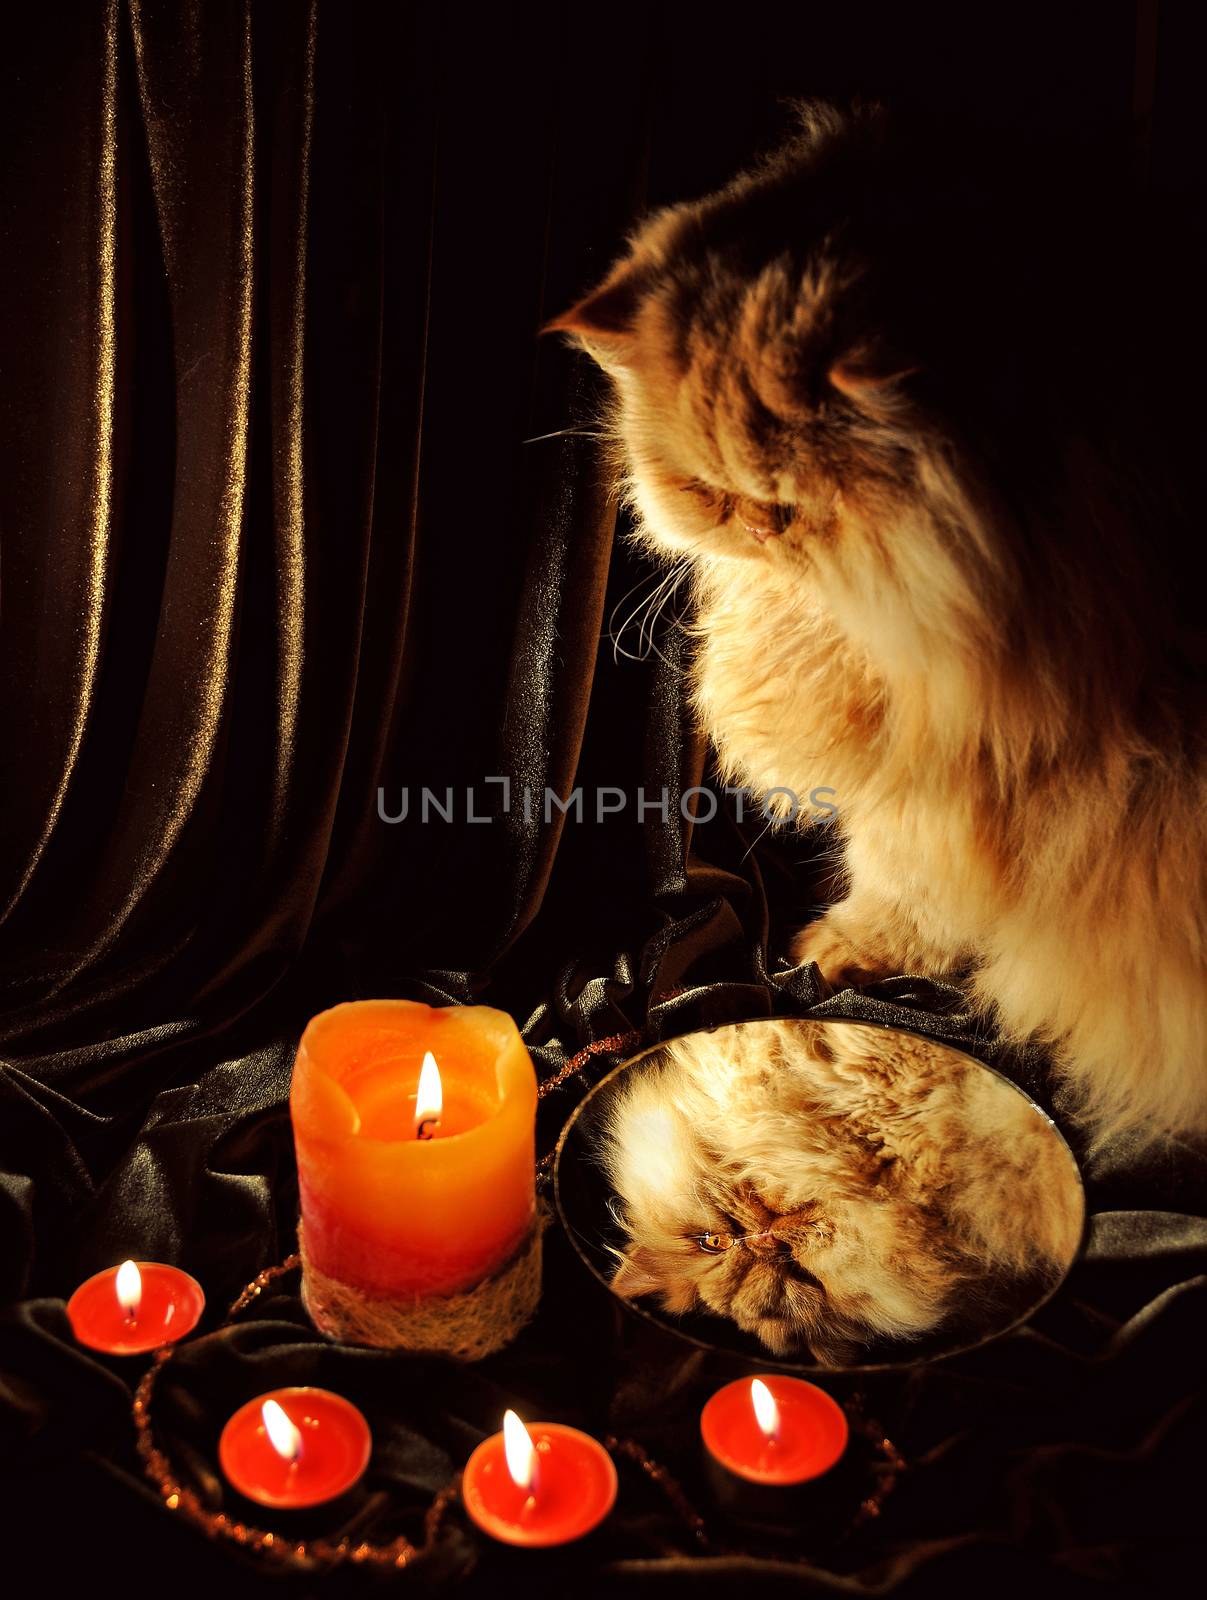 Red Cat looking at his reflection in the mirror and practice divination. Merry Christmas